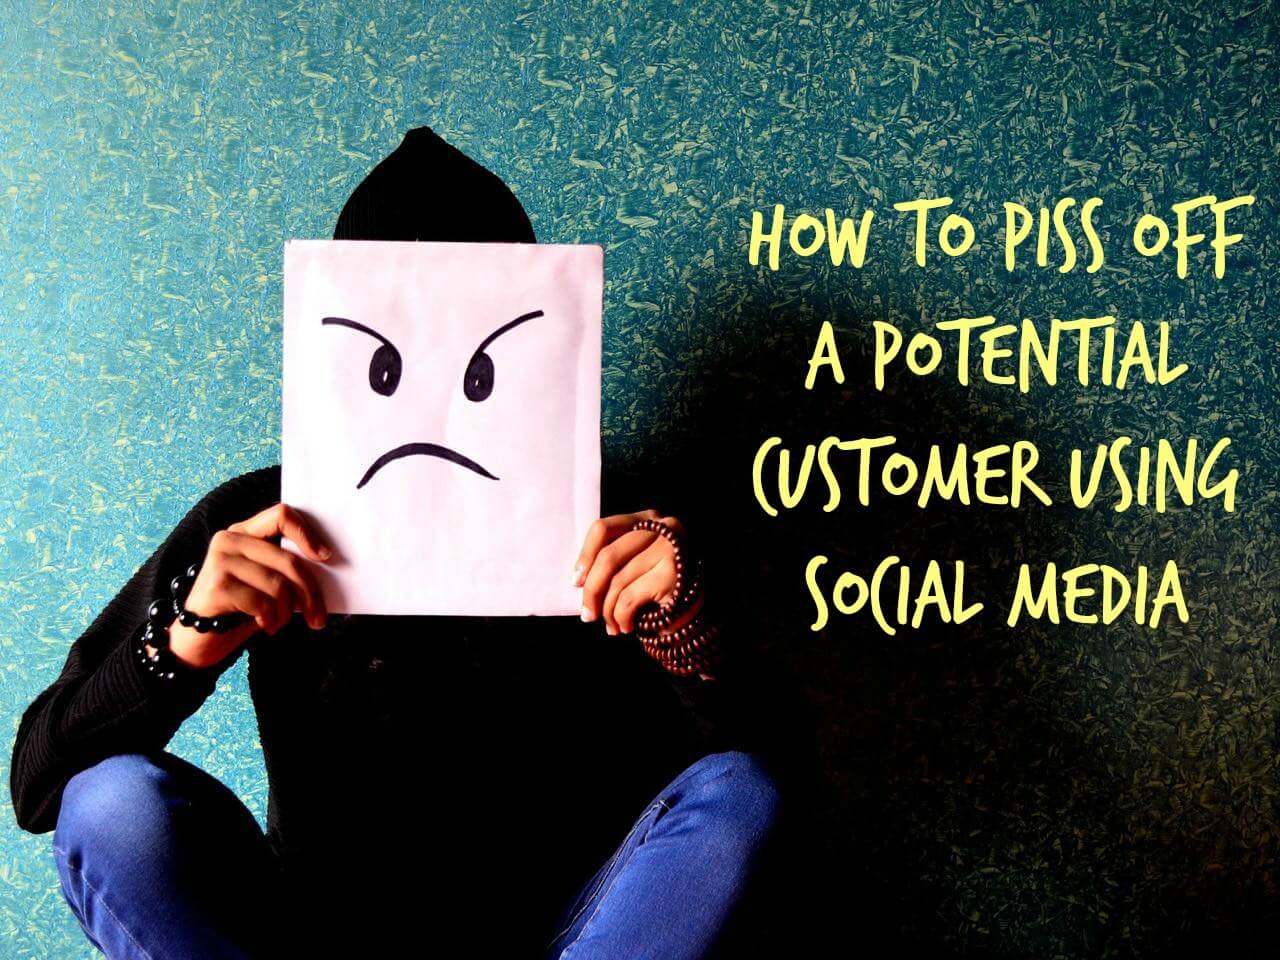 how to piss off a potential customer using social media